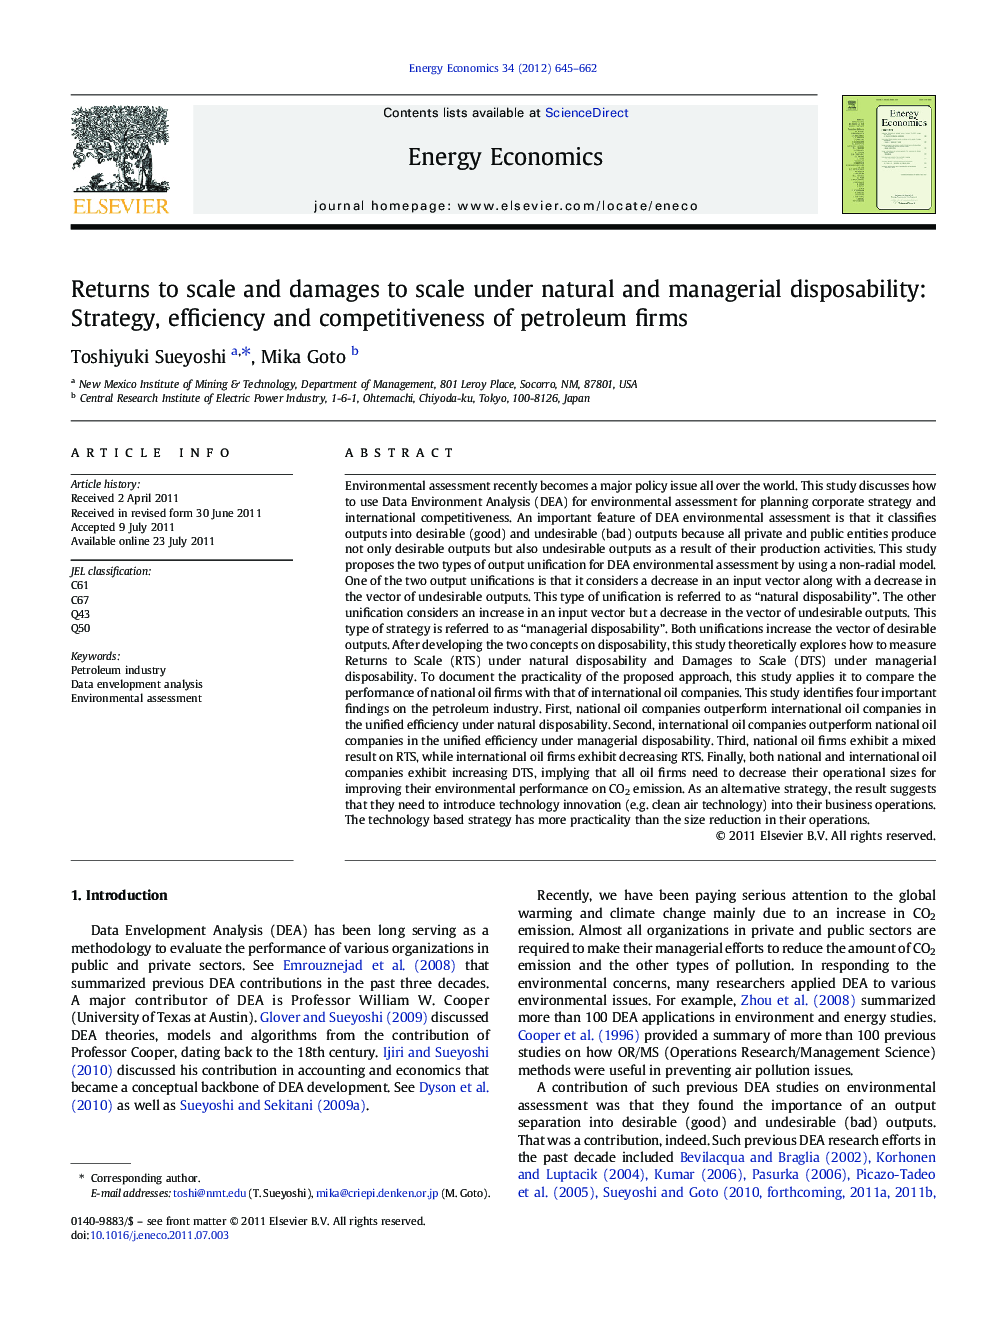 Returns to scale and damages to scale under natural and managerial disposability: Strategy, efficiency and competitiveness of petroleum firms